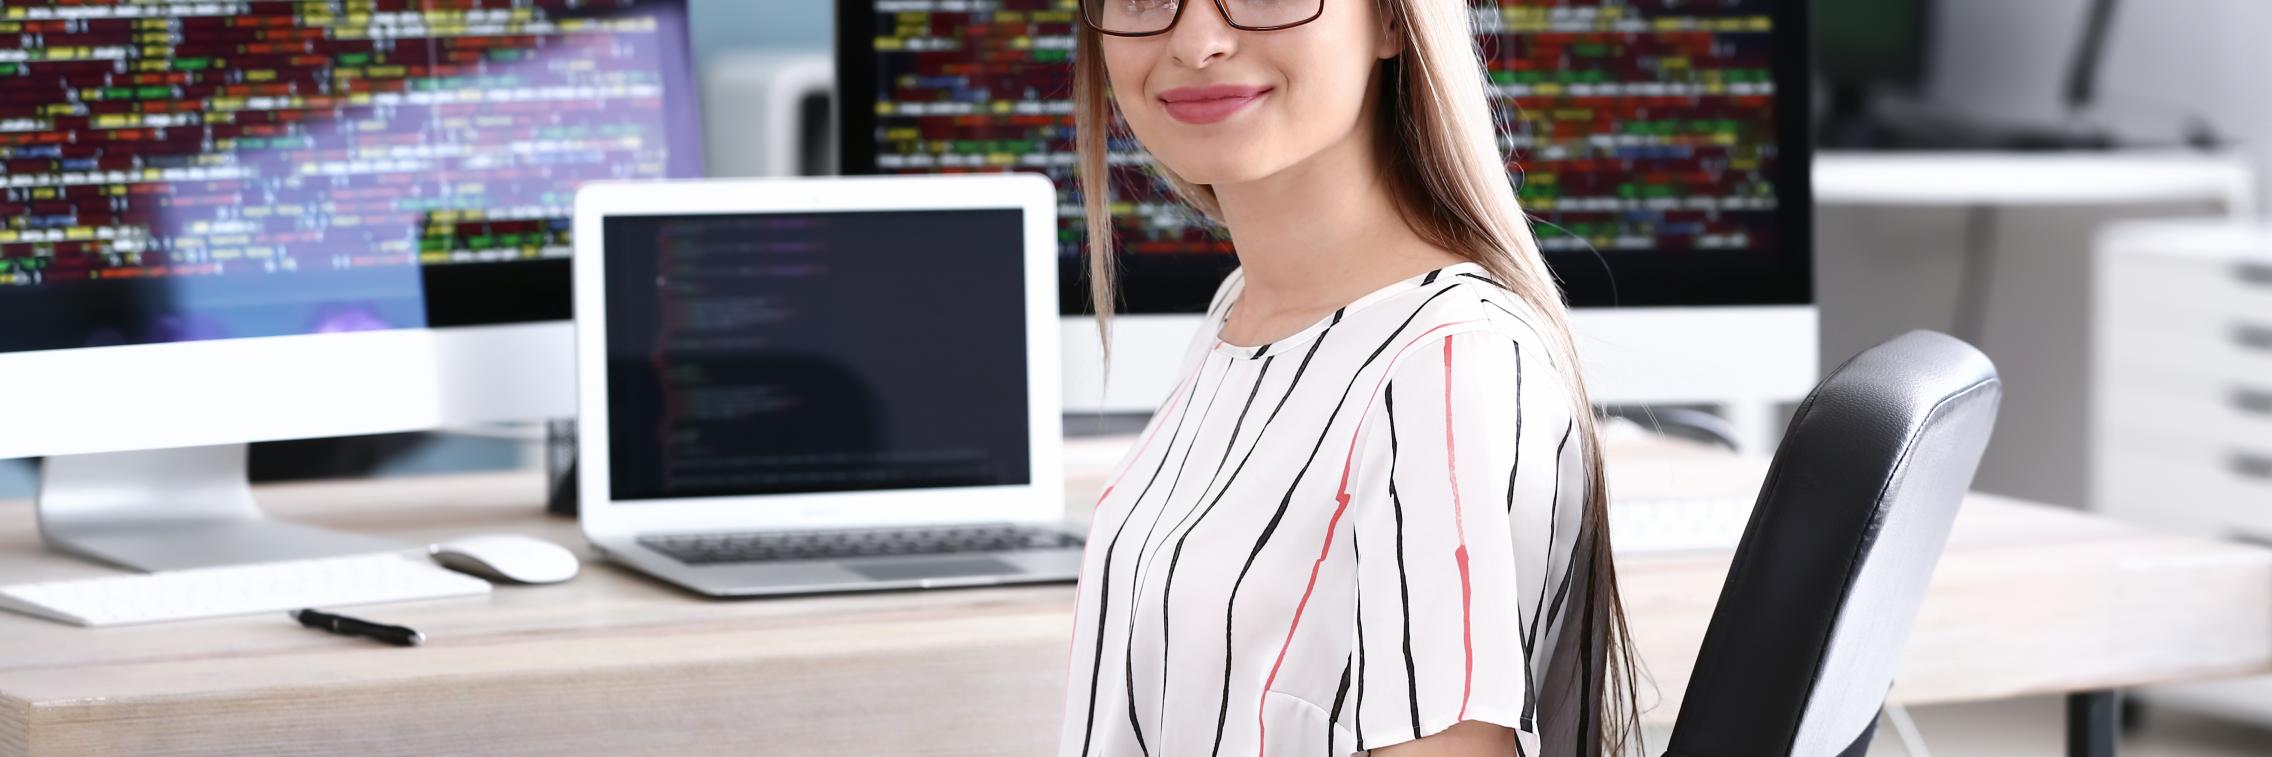 A young woman sits at a desk by a laptop with coding screens in background